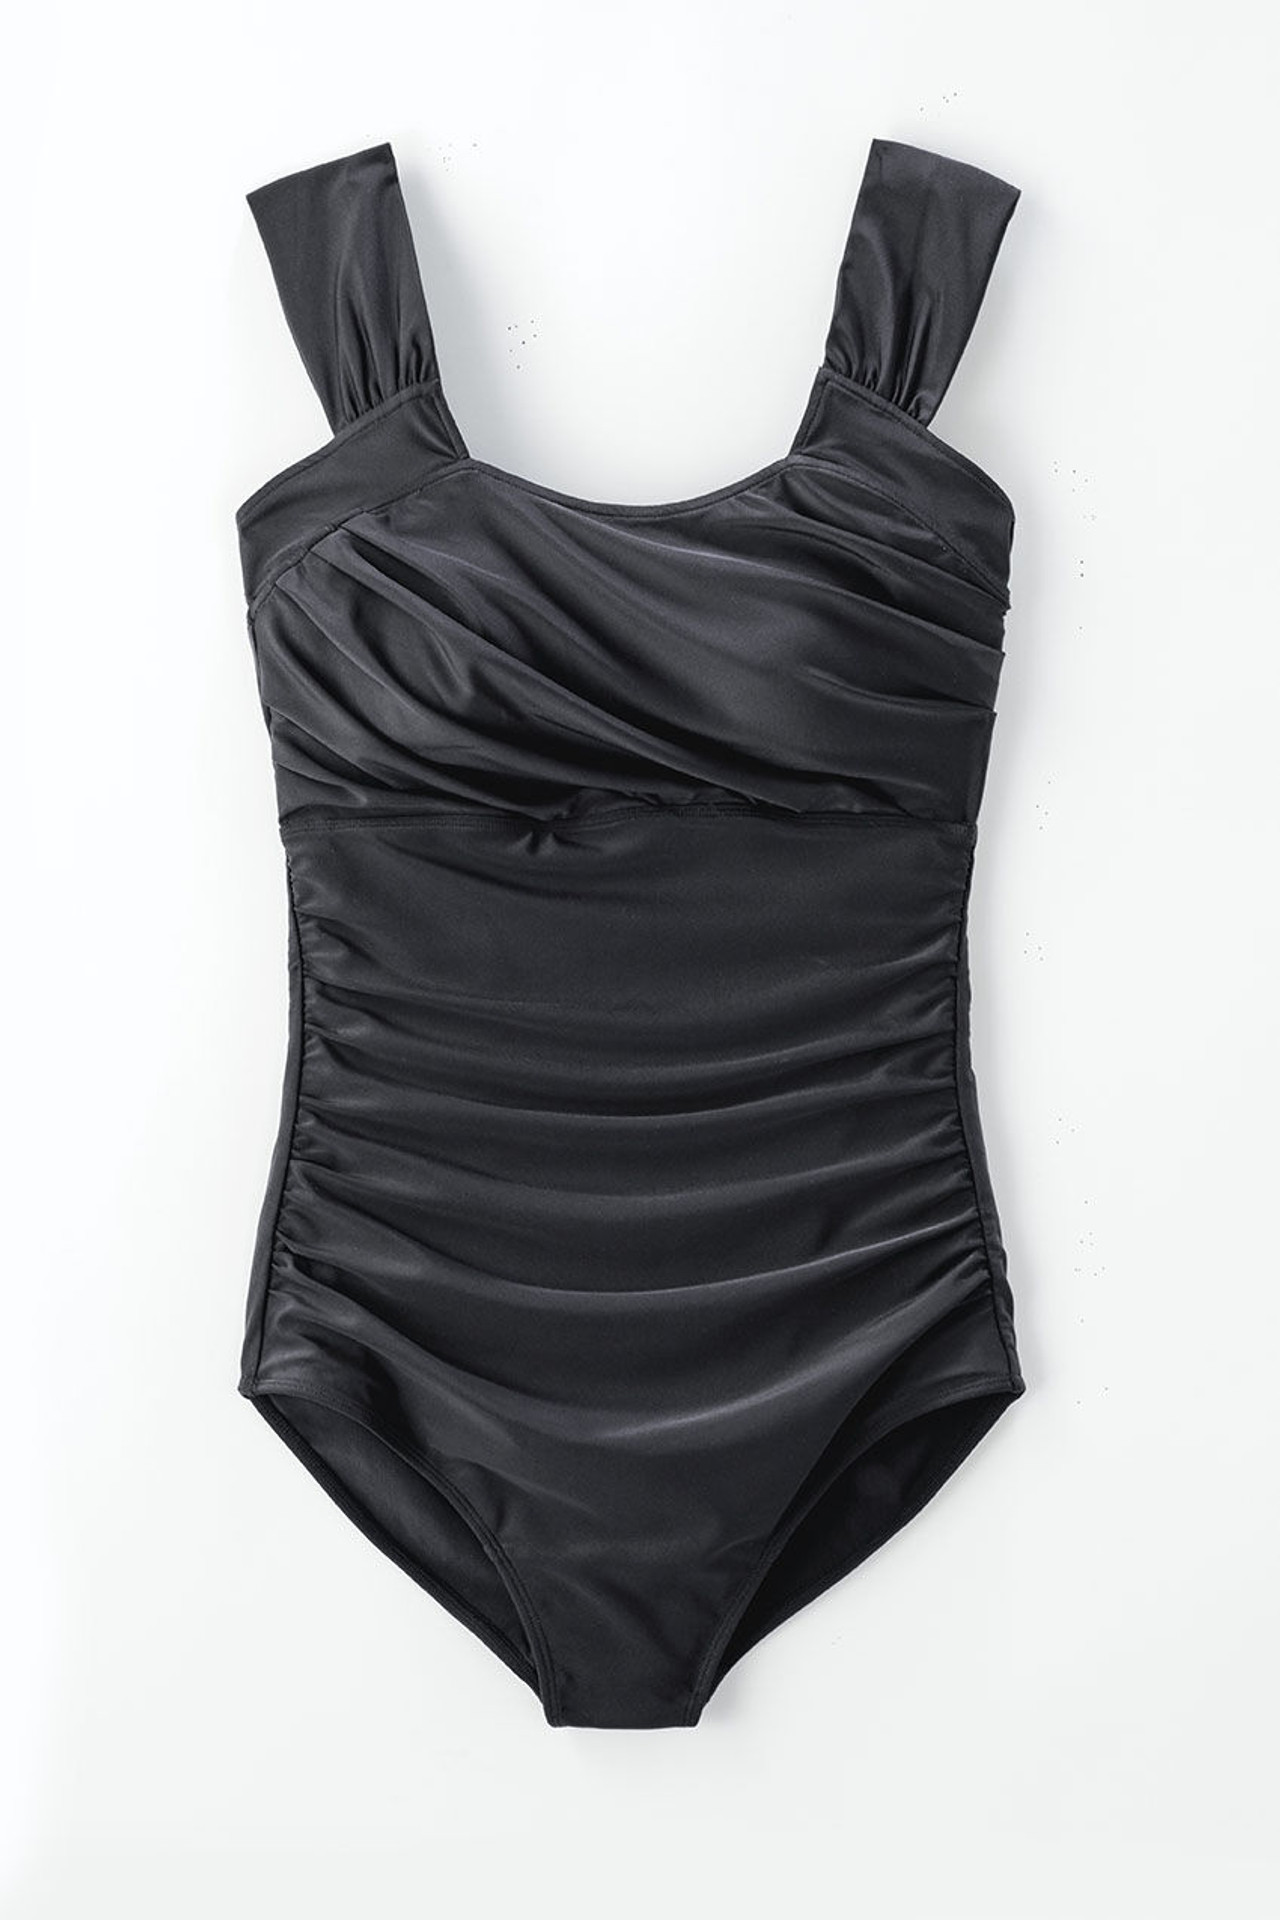 Gemini Bathing Suit in Black – Shades of Grey Boutique